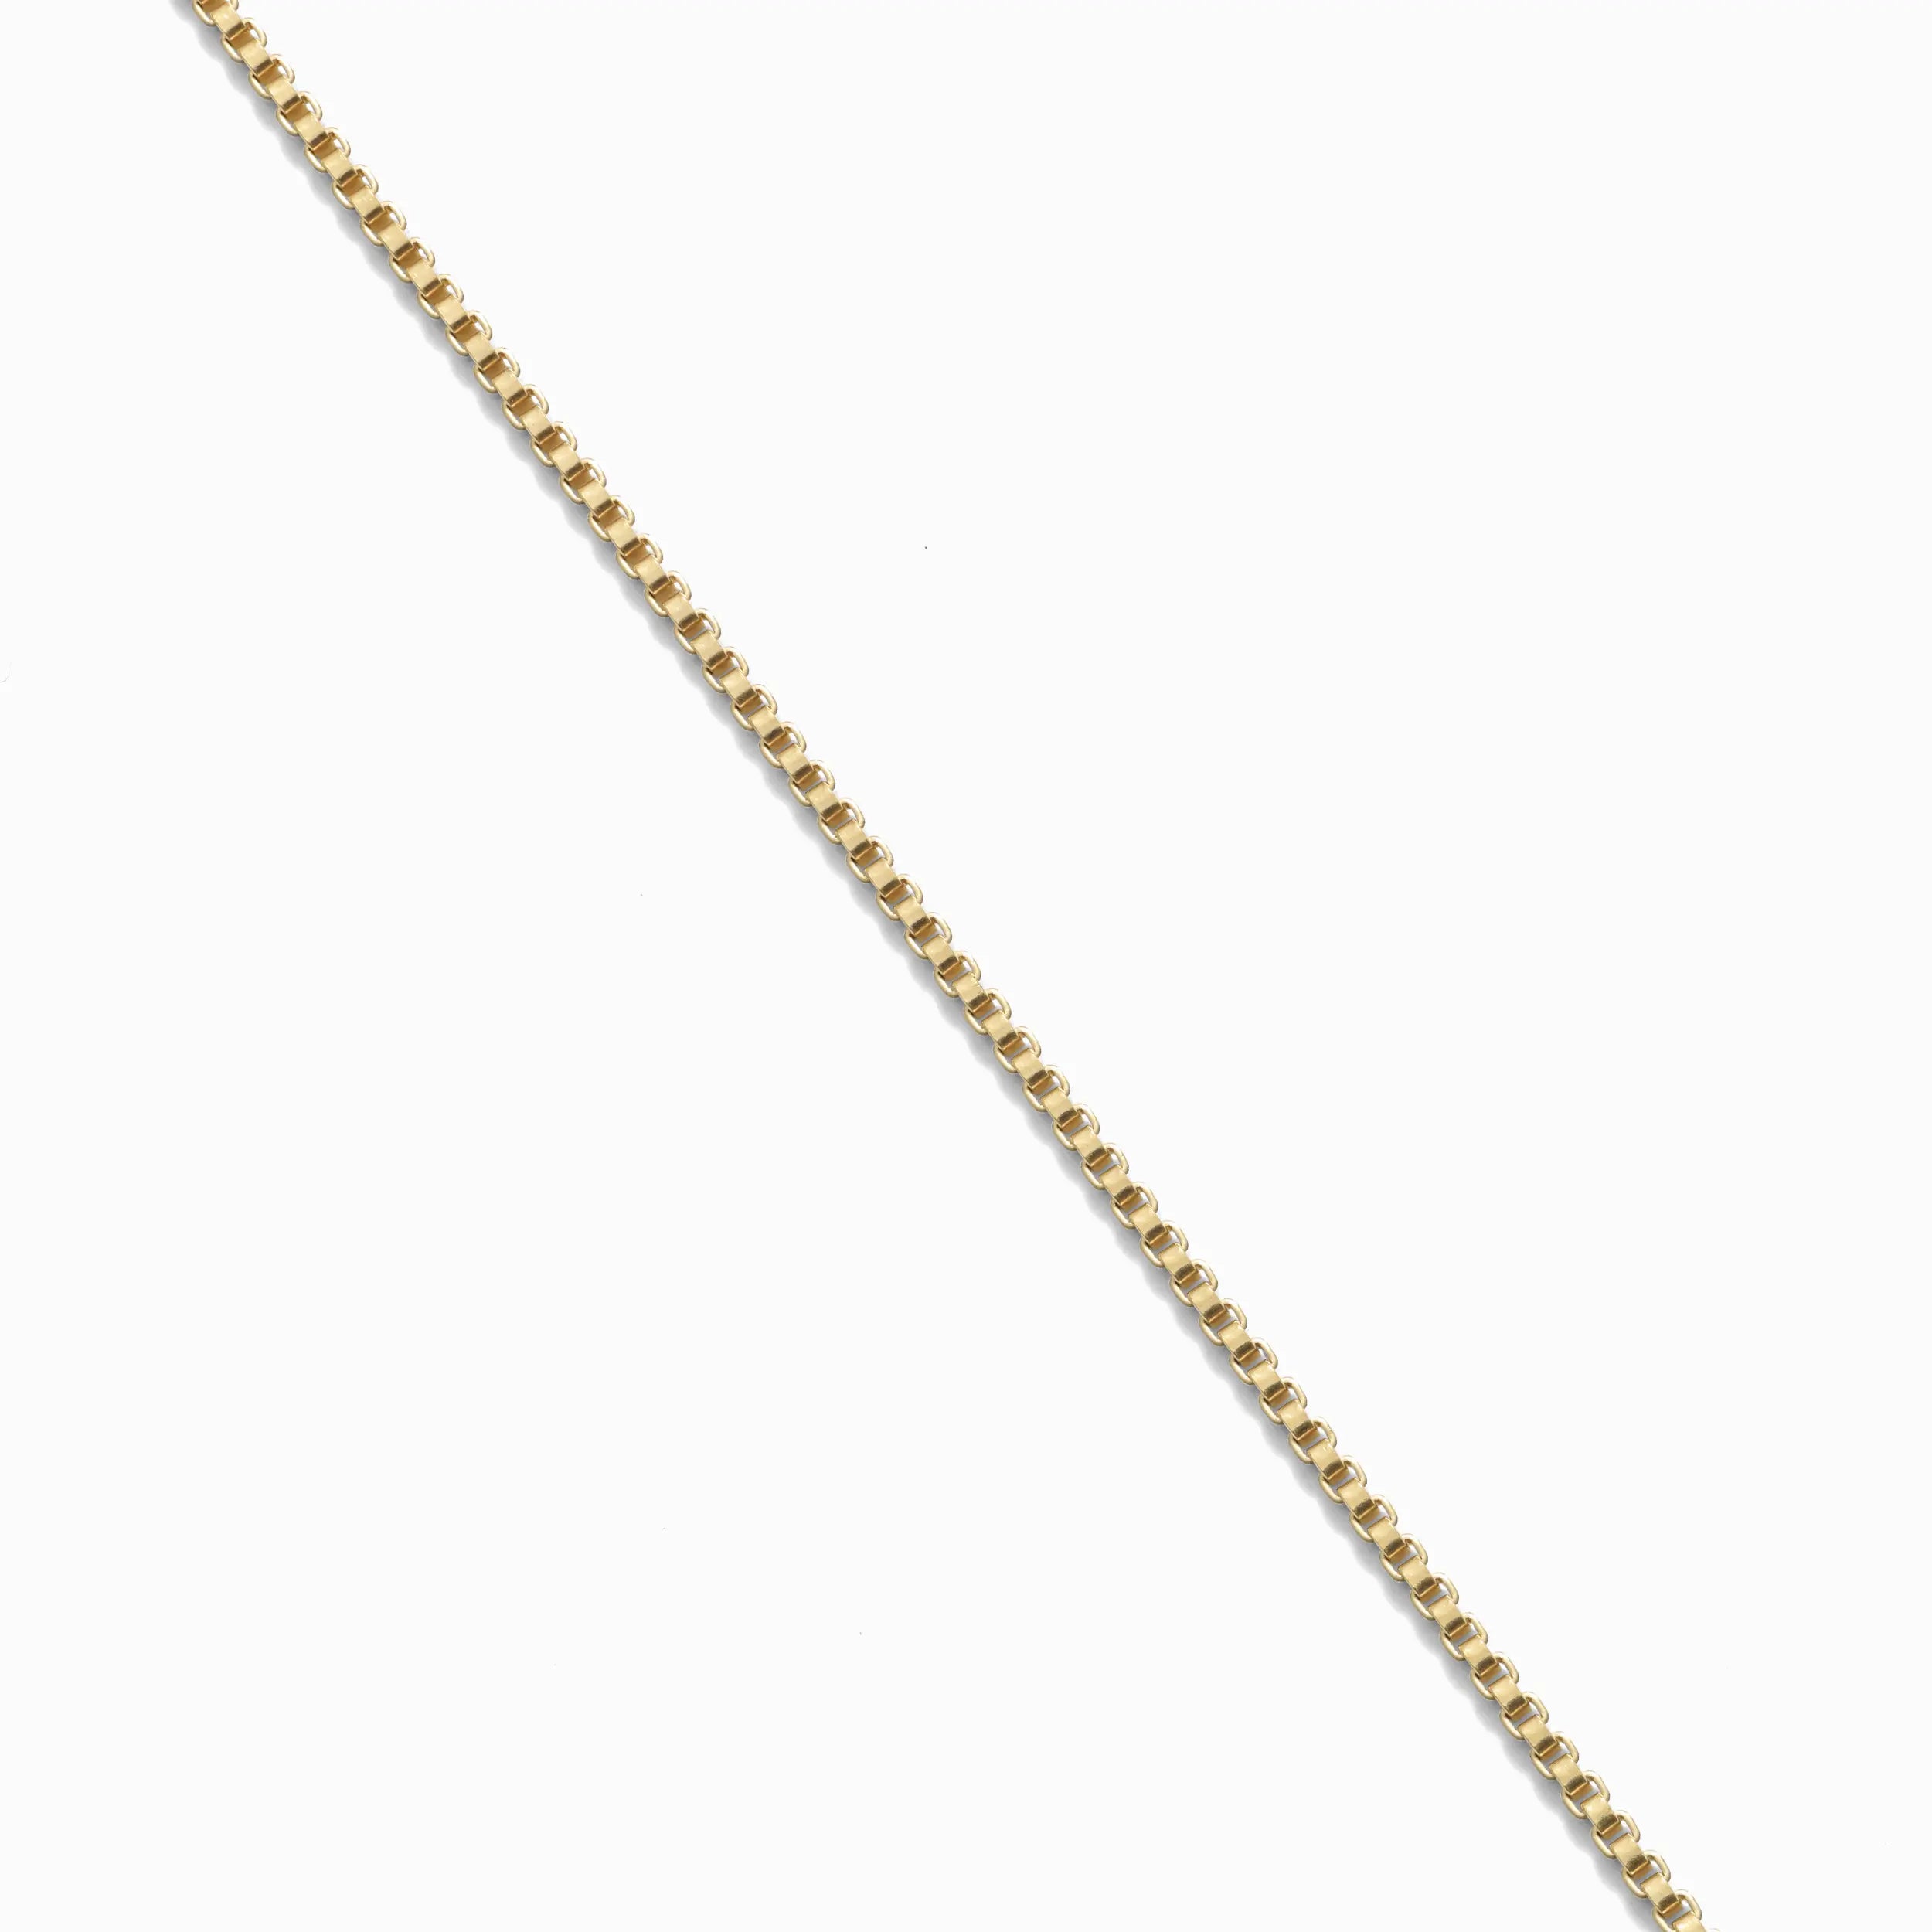 60cm Fancy Box Link Necklace in 18ct Yellow Gold | Pragnell